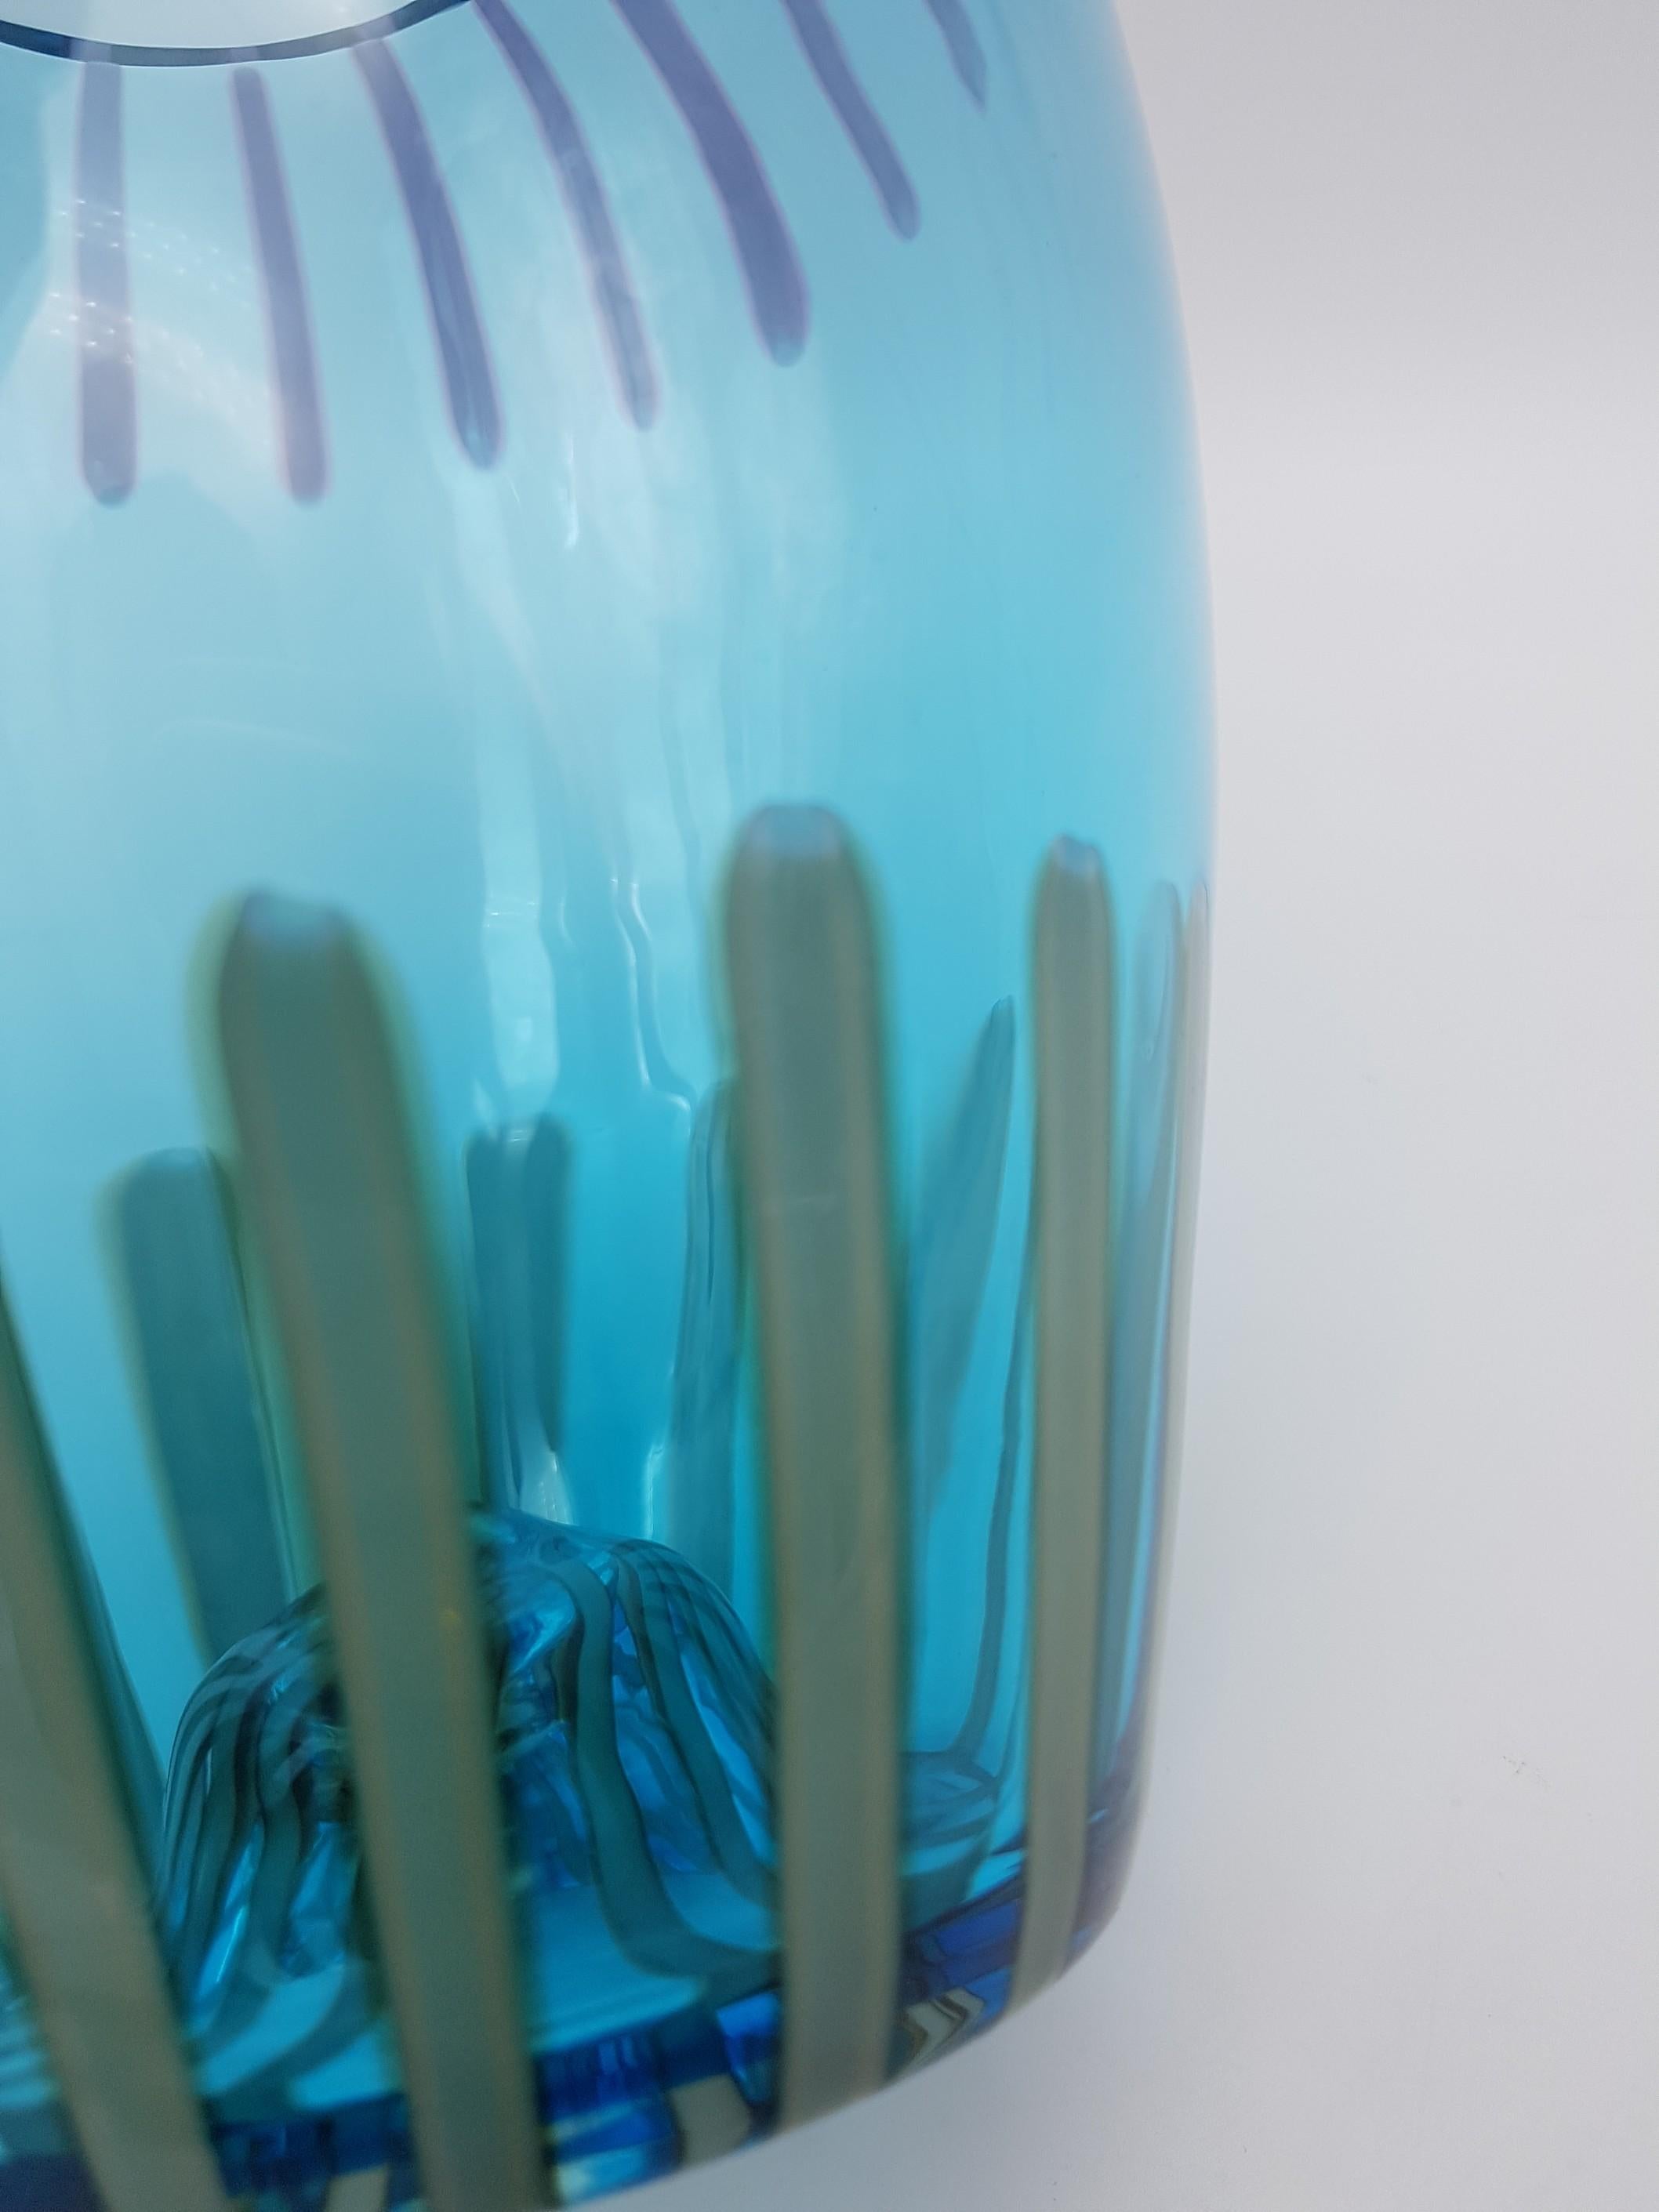 Modern Turquoise/Blue Murano-Glass Vase by Gino Cenedese E Figlio, late 1990s For Sale 6